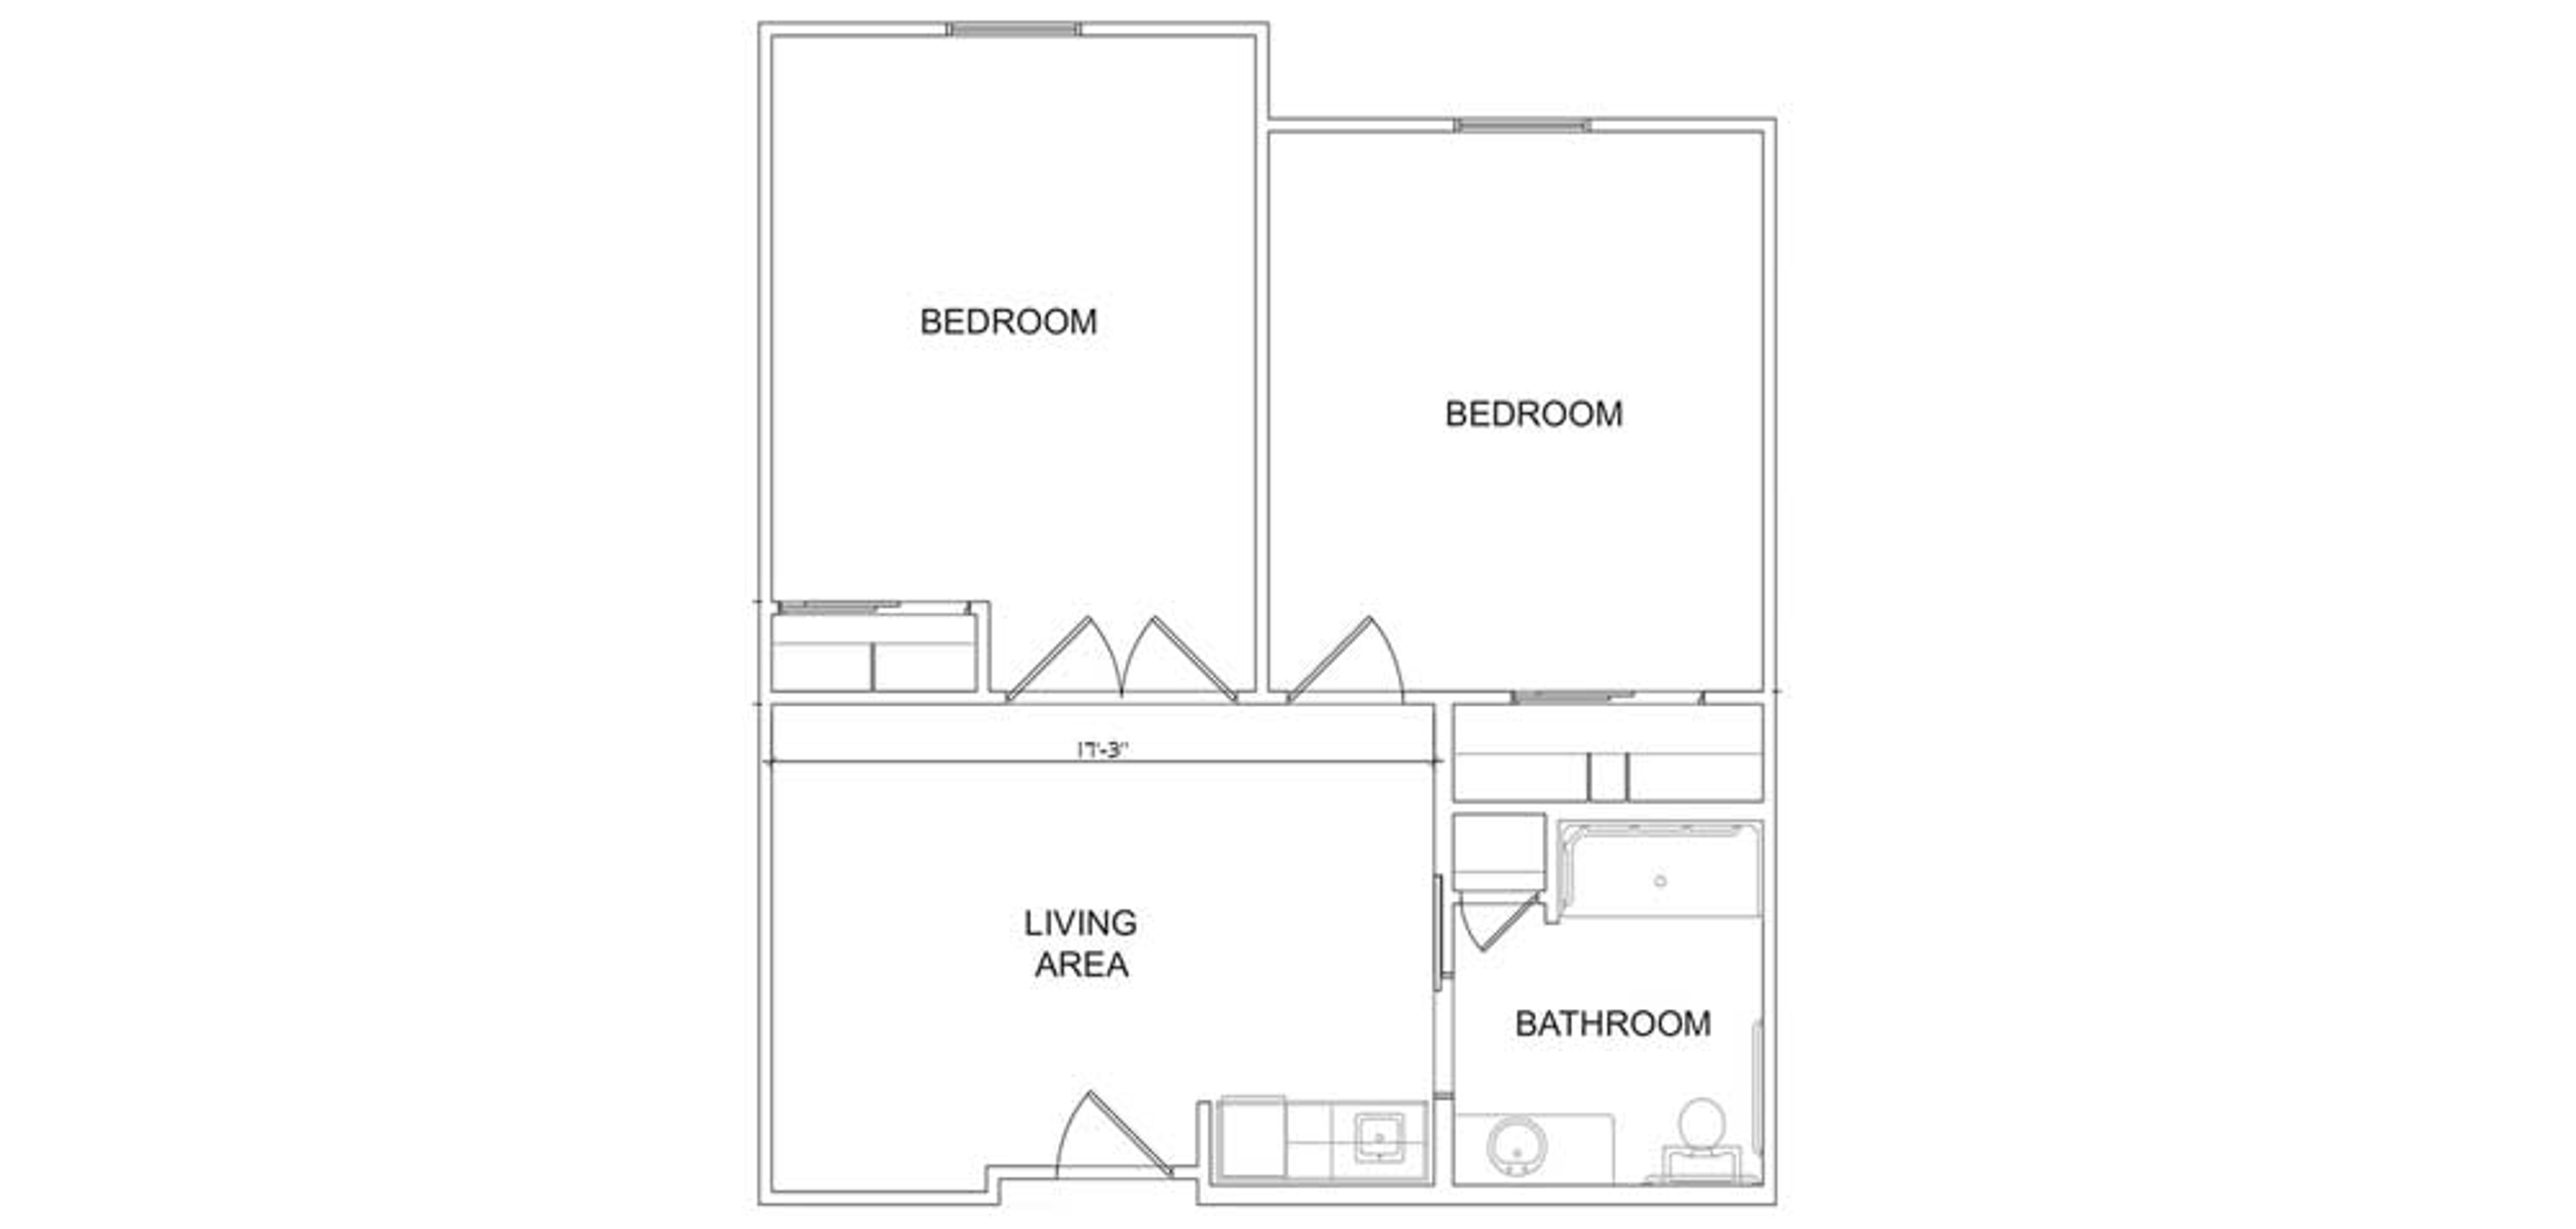 Floorplan - Stonefield - 2 bed, 1 bath Assisted Living